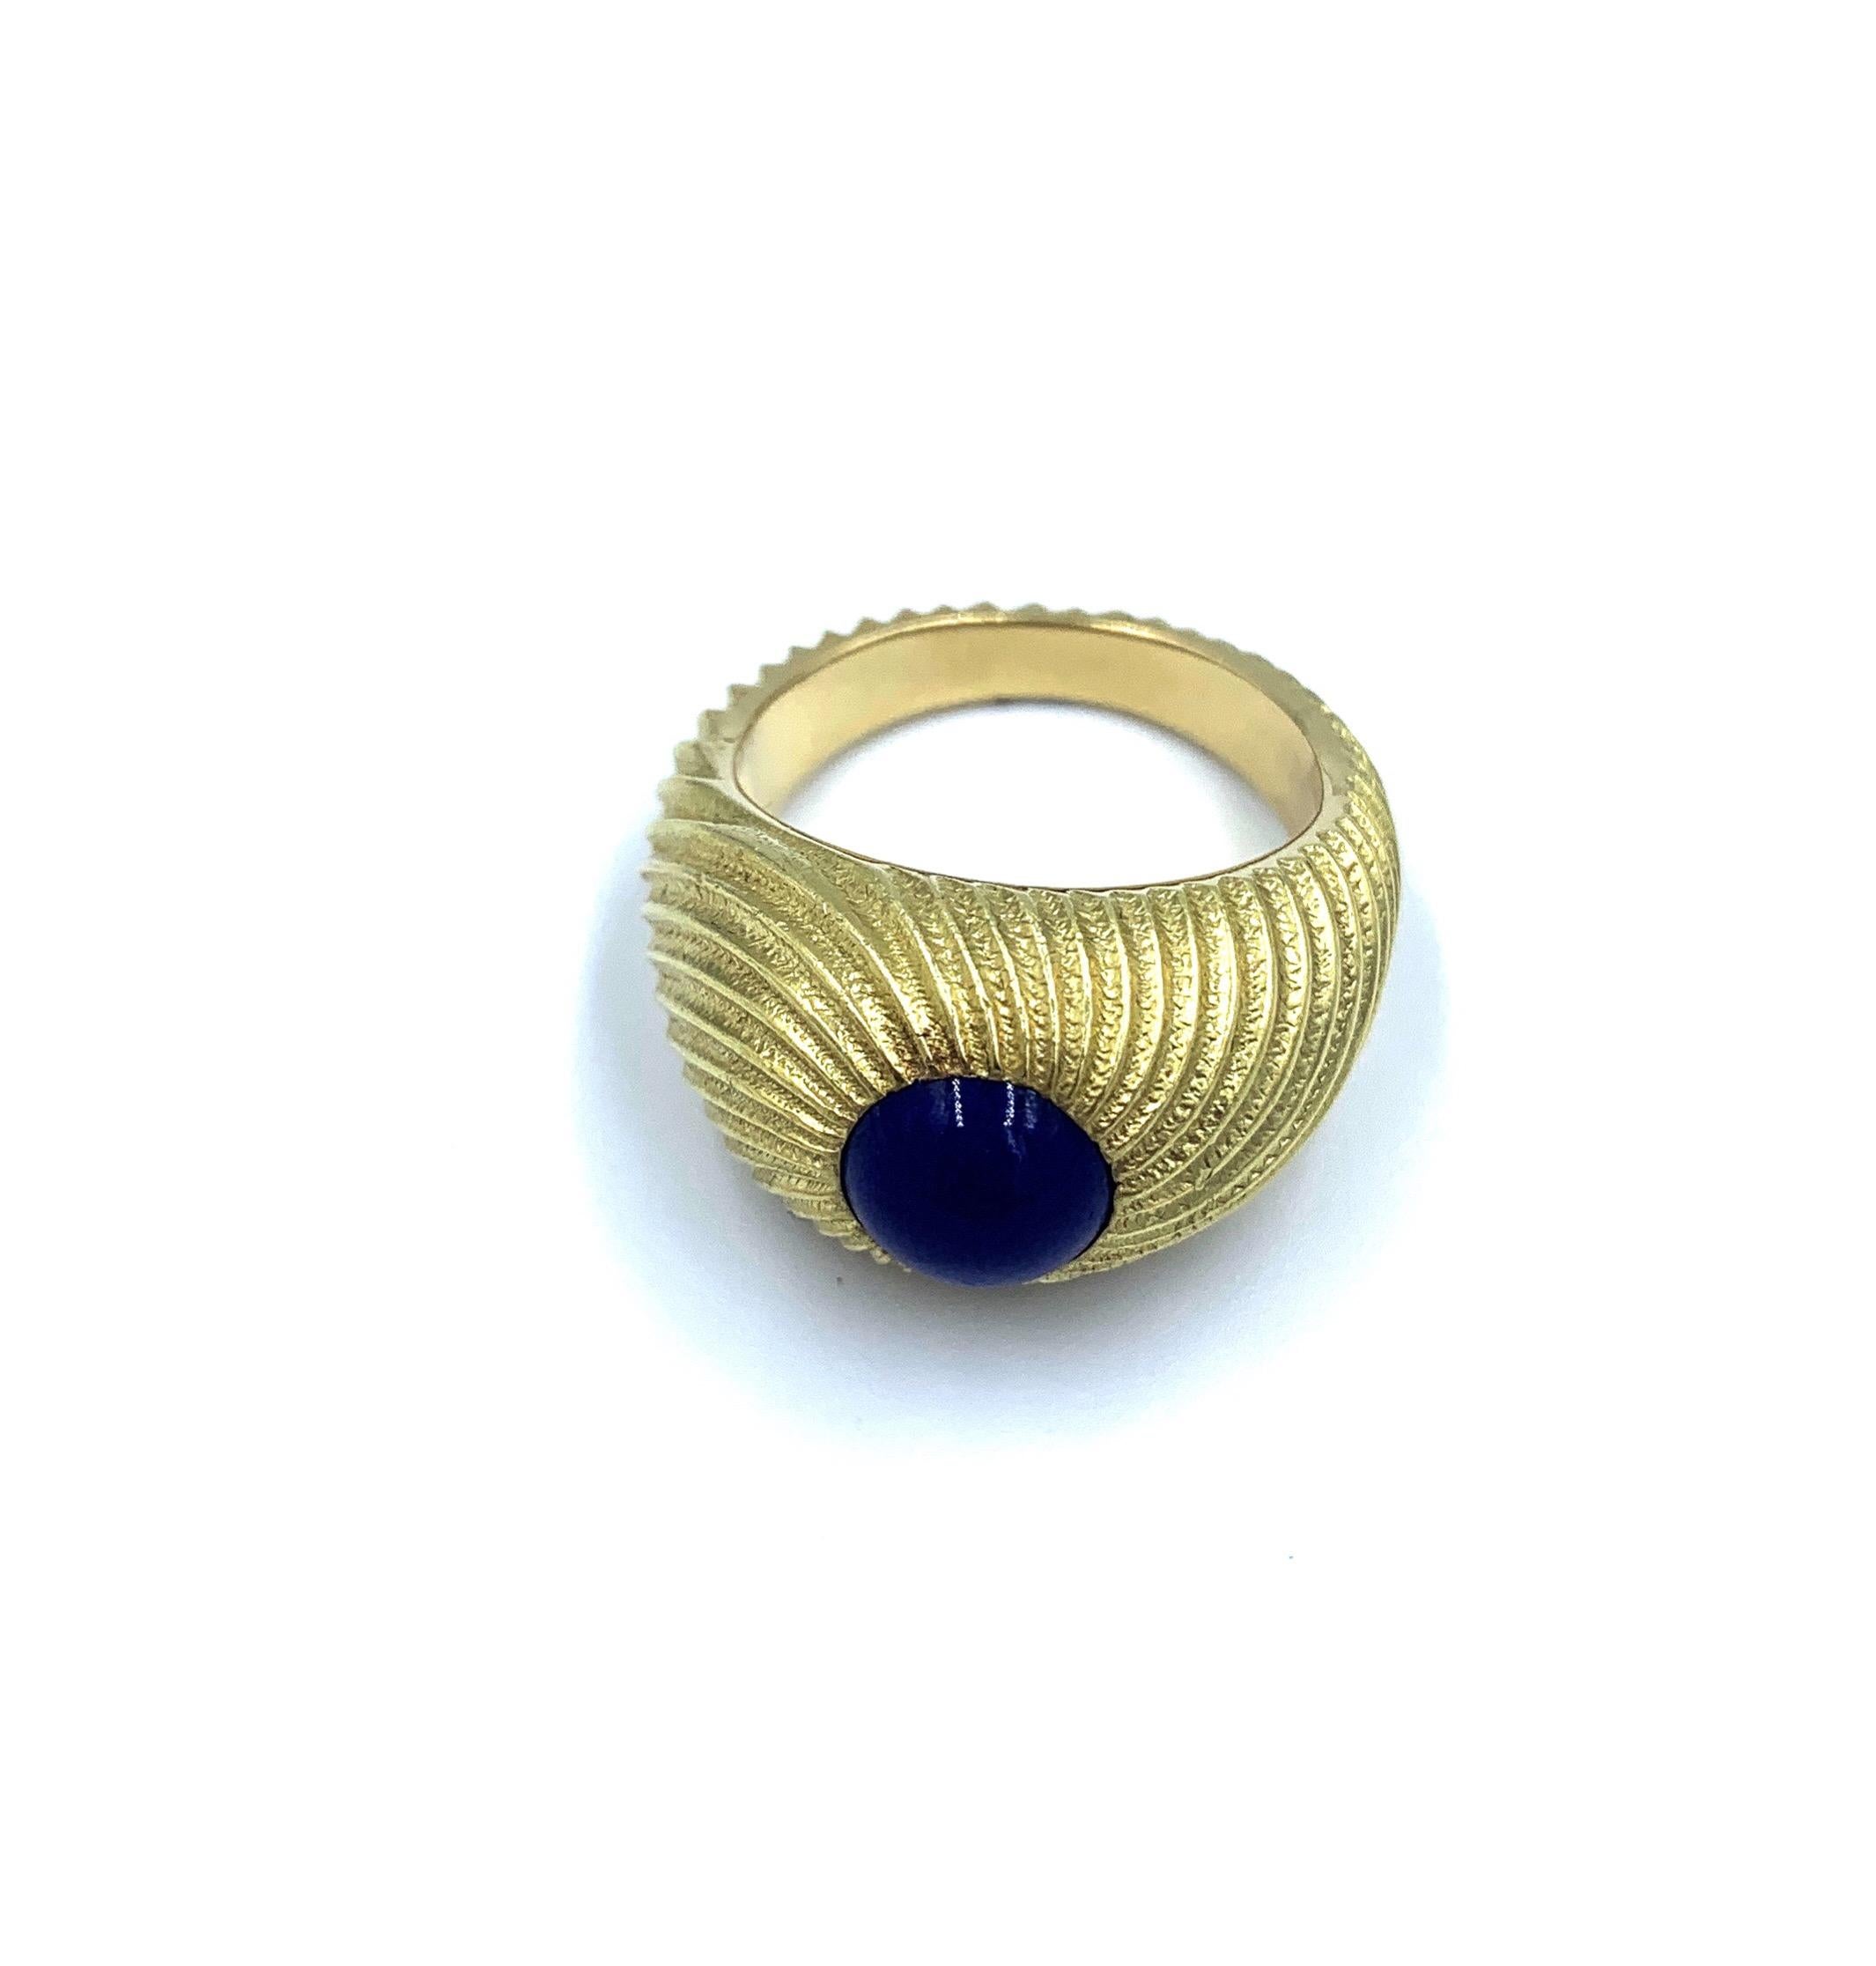 Beautiful 18kt yellow gold gent's ring designed by Jean Shlumberger for Tiffany & Co.  Mounted with a Blue Lapis Cabochon, this classic and elegant ring was created by one of Tiffany’s top designers. 

Size 9.5

18.6 grams 